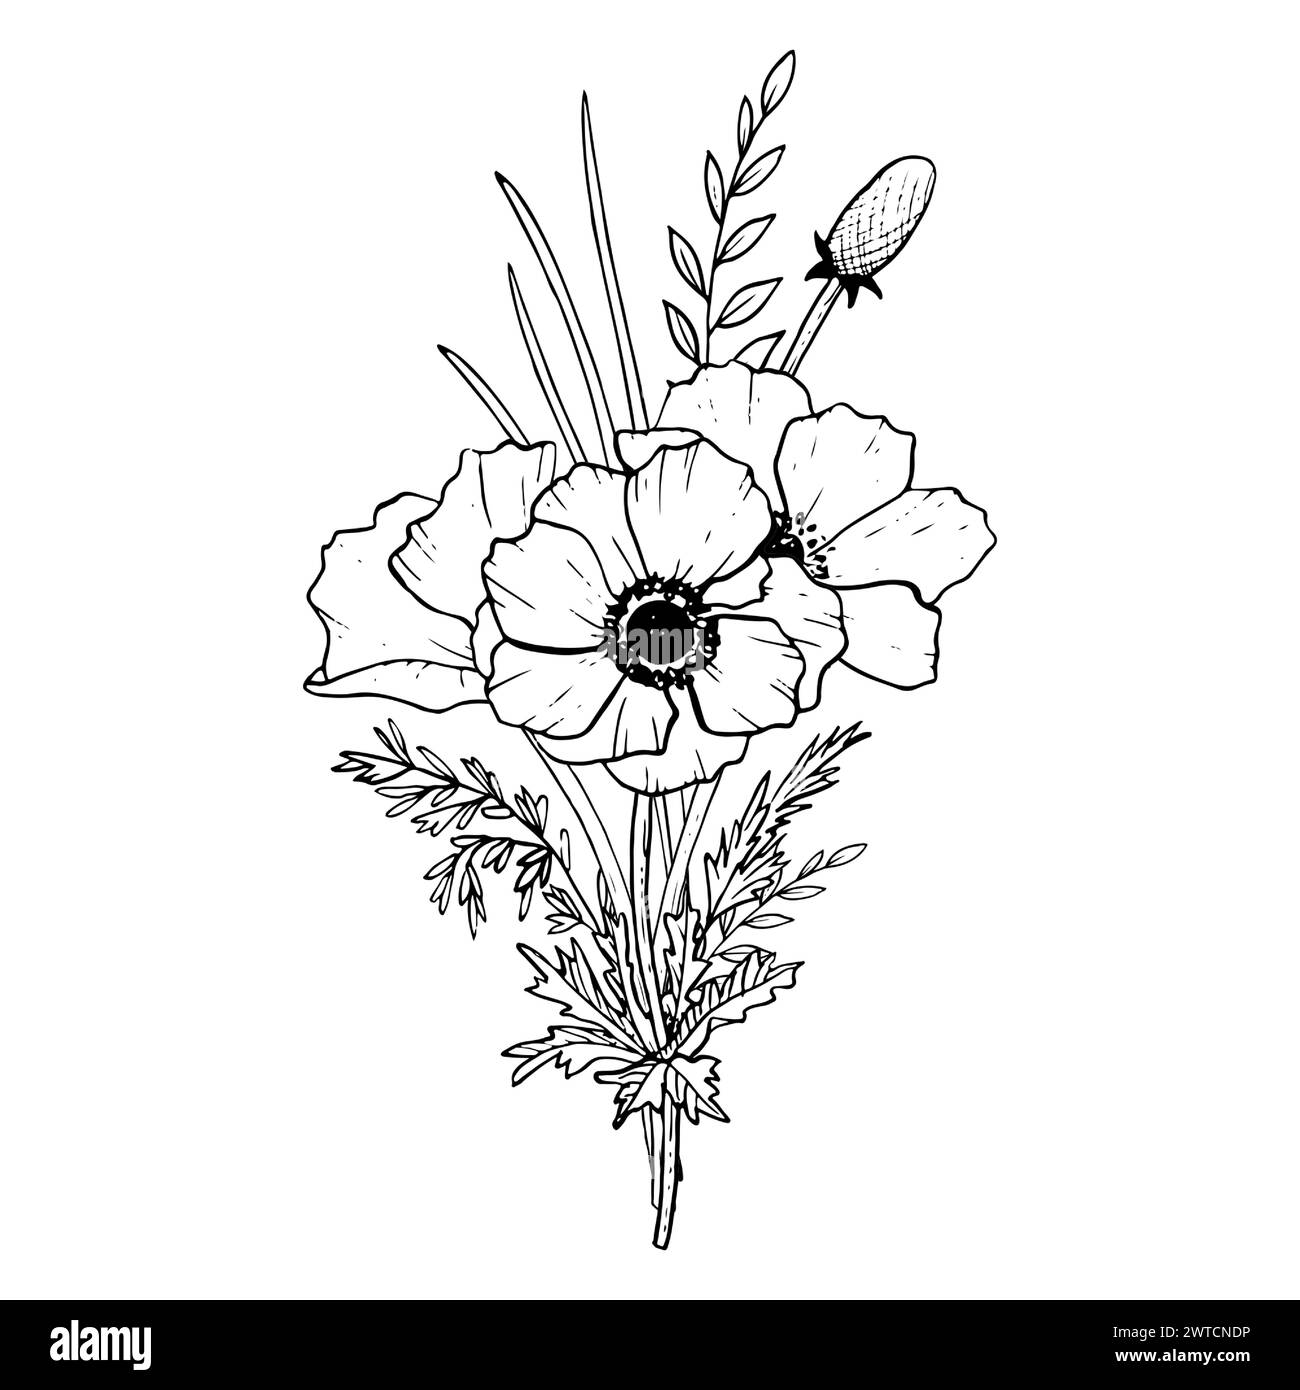 Field poppies bouquet with wild herbs and grass Stock Vector